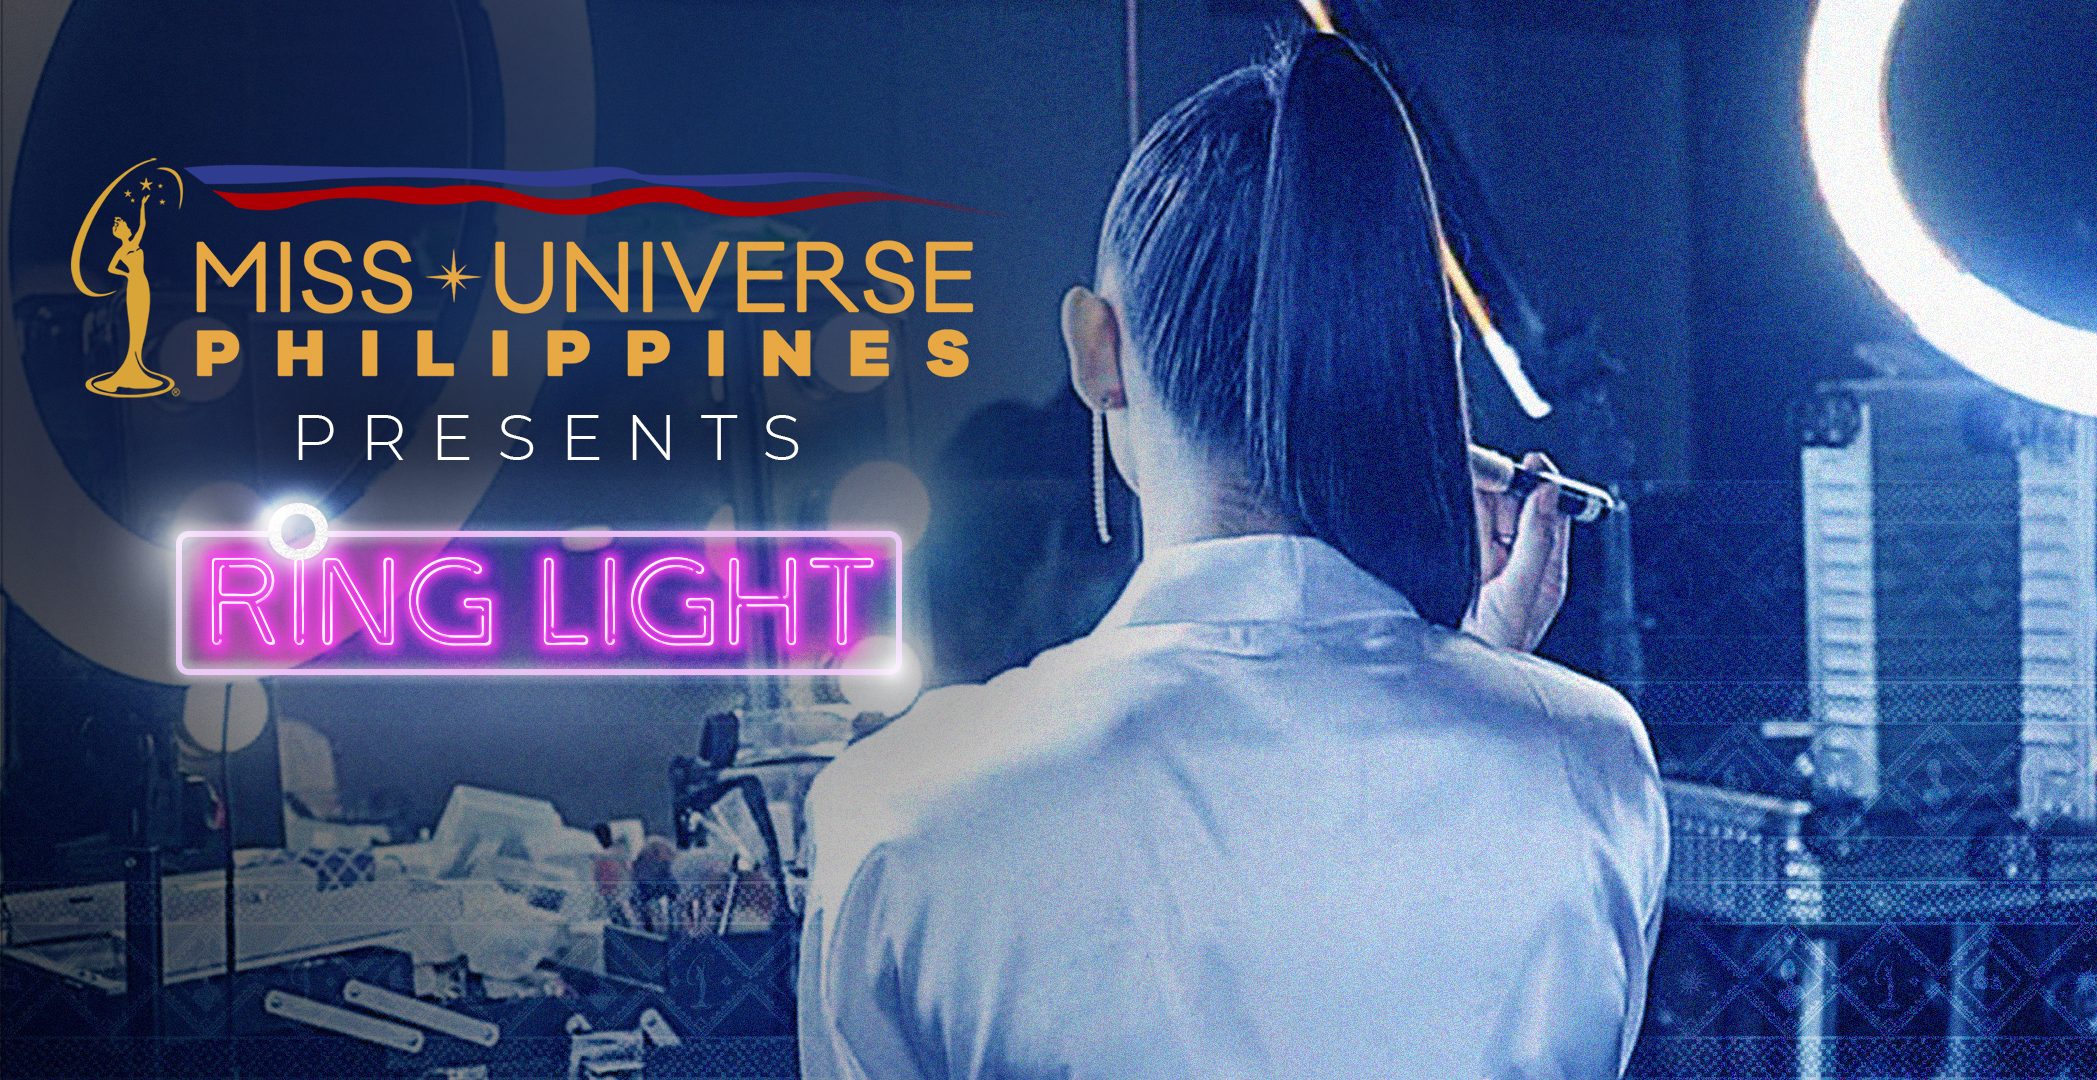 Miss Universe Philippines to launch online series ‘Ring Light’